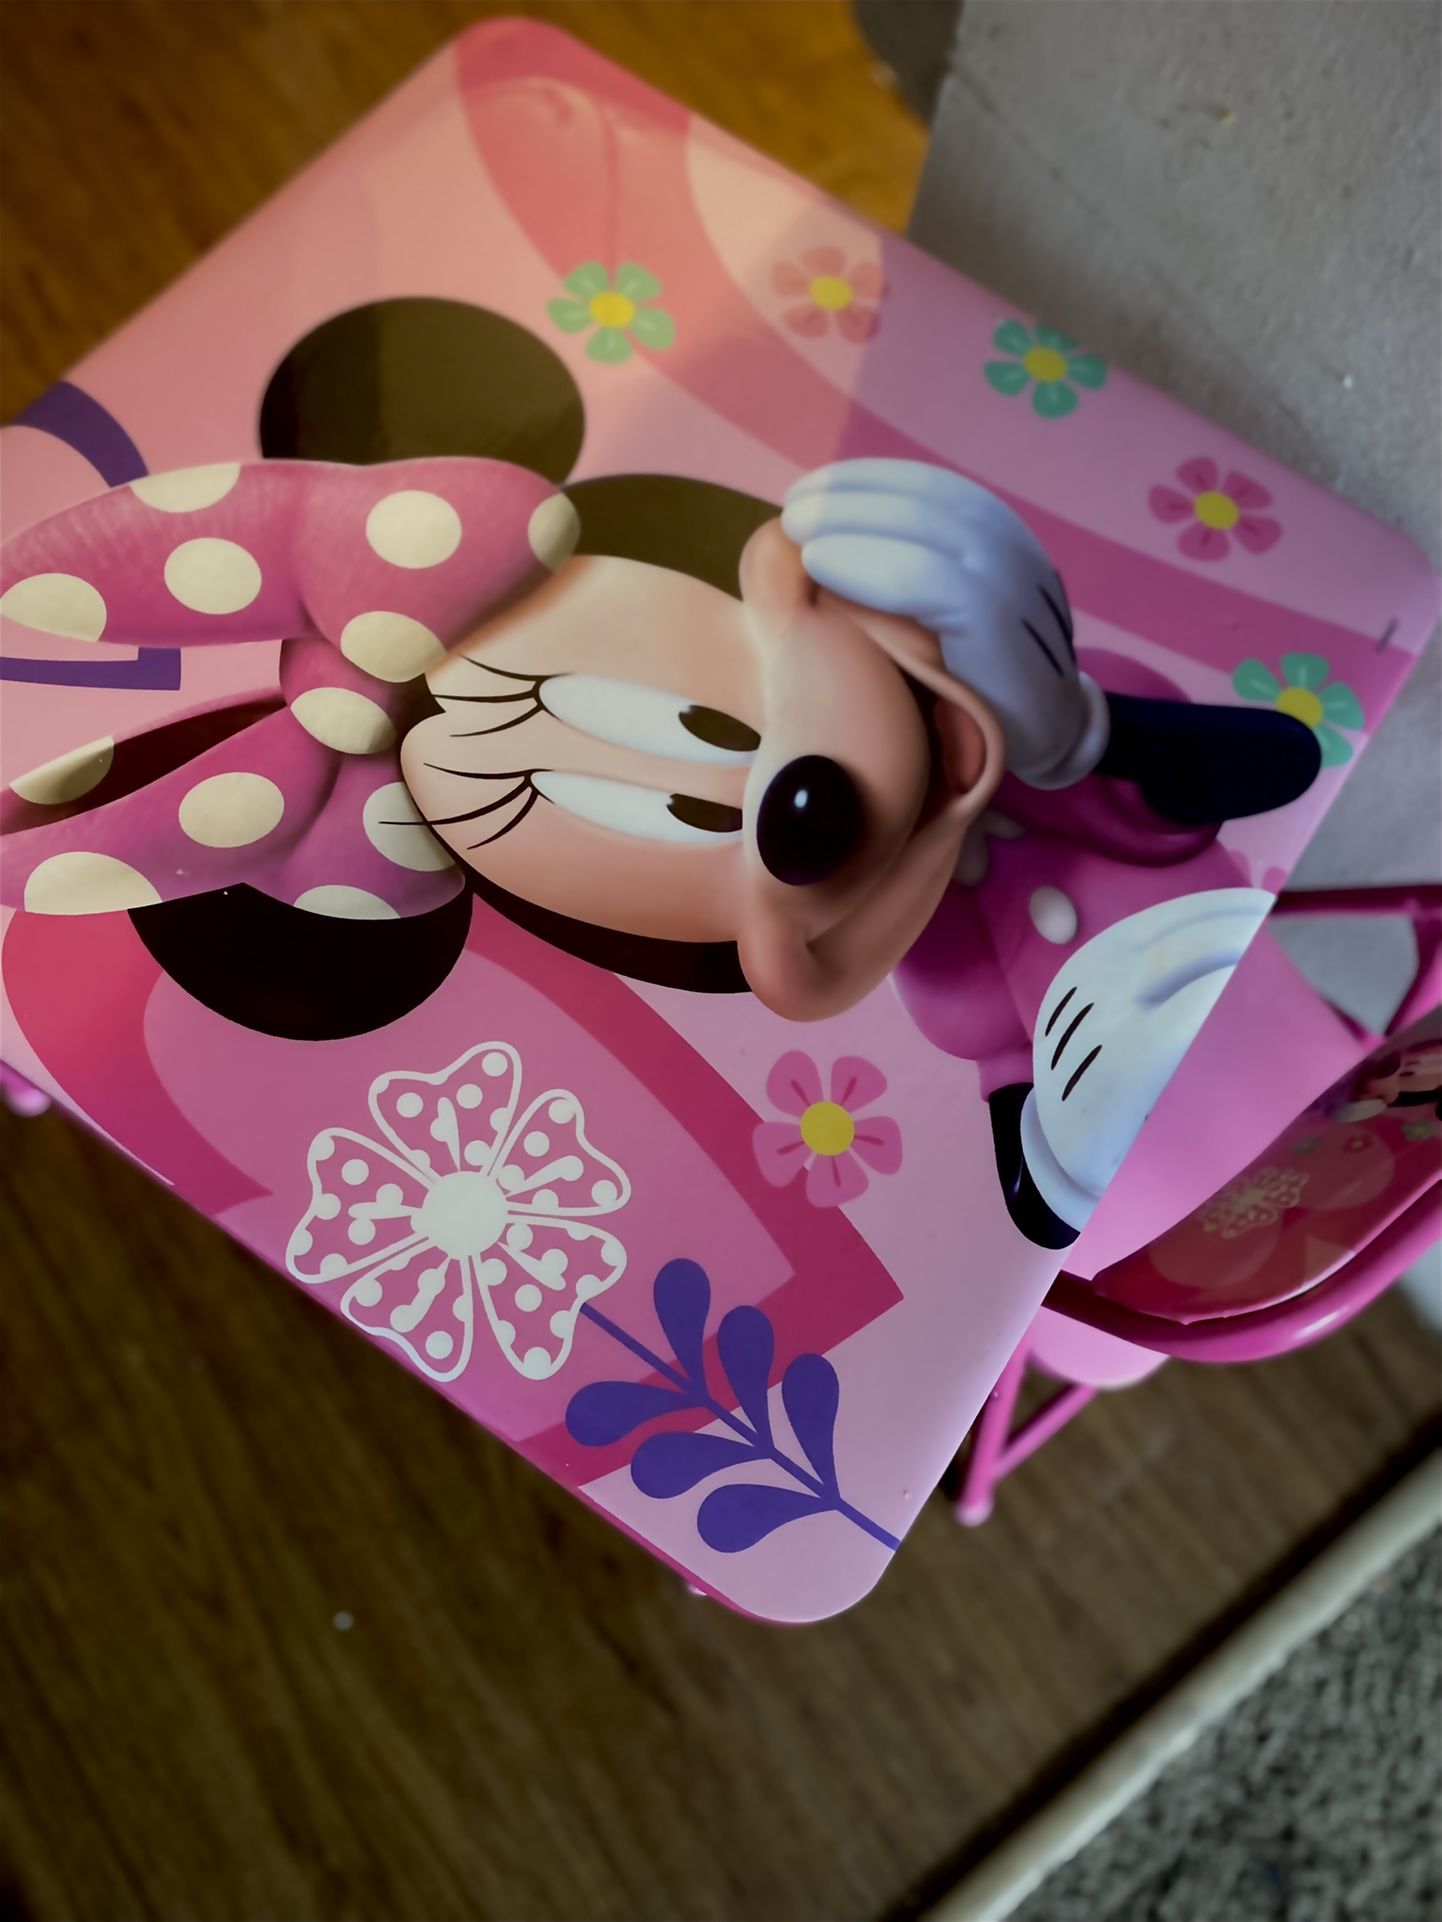 Minnie Mouse Table And Chair